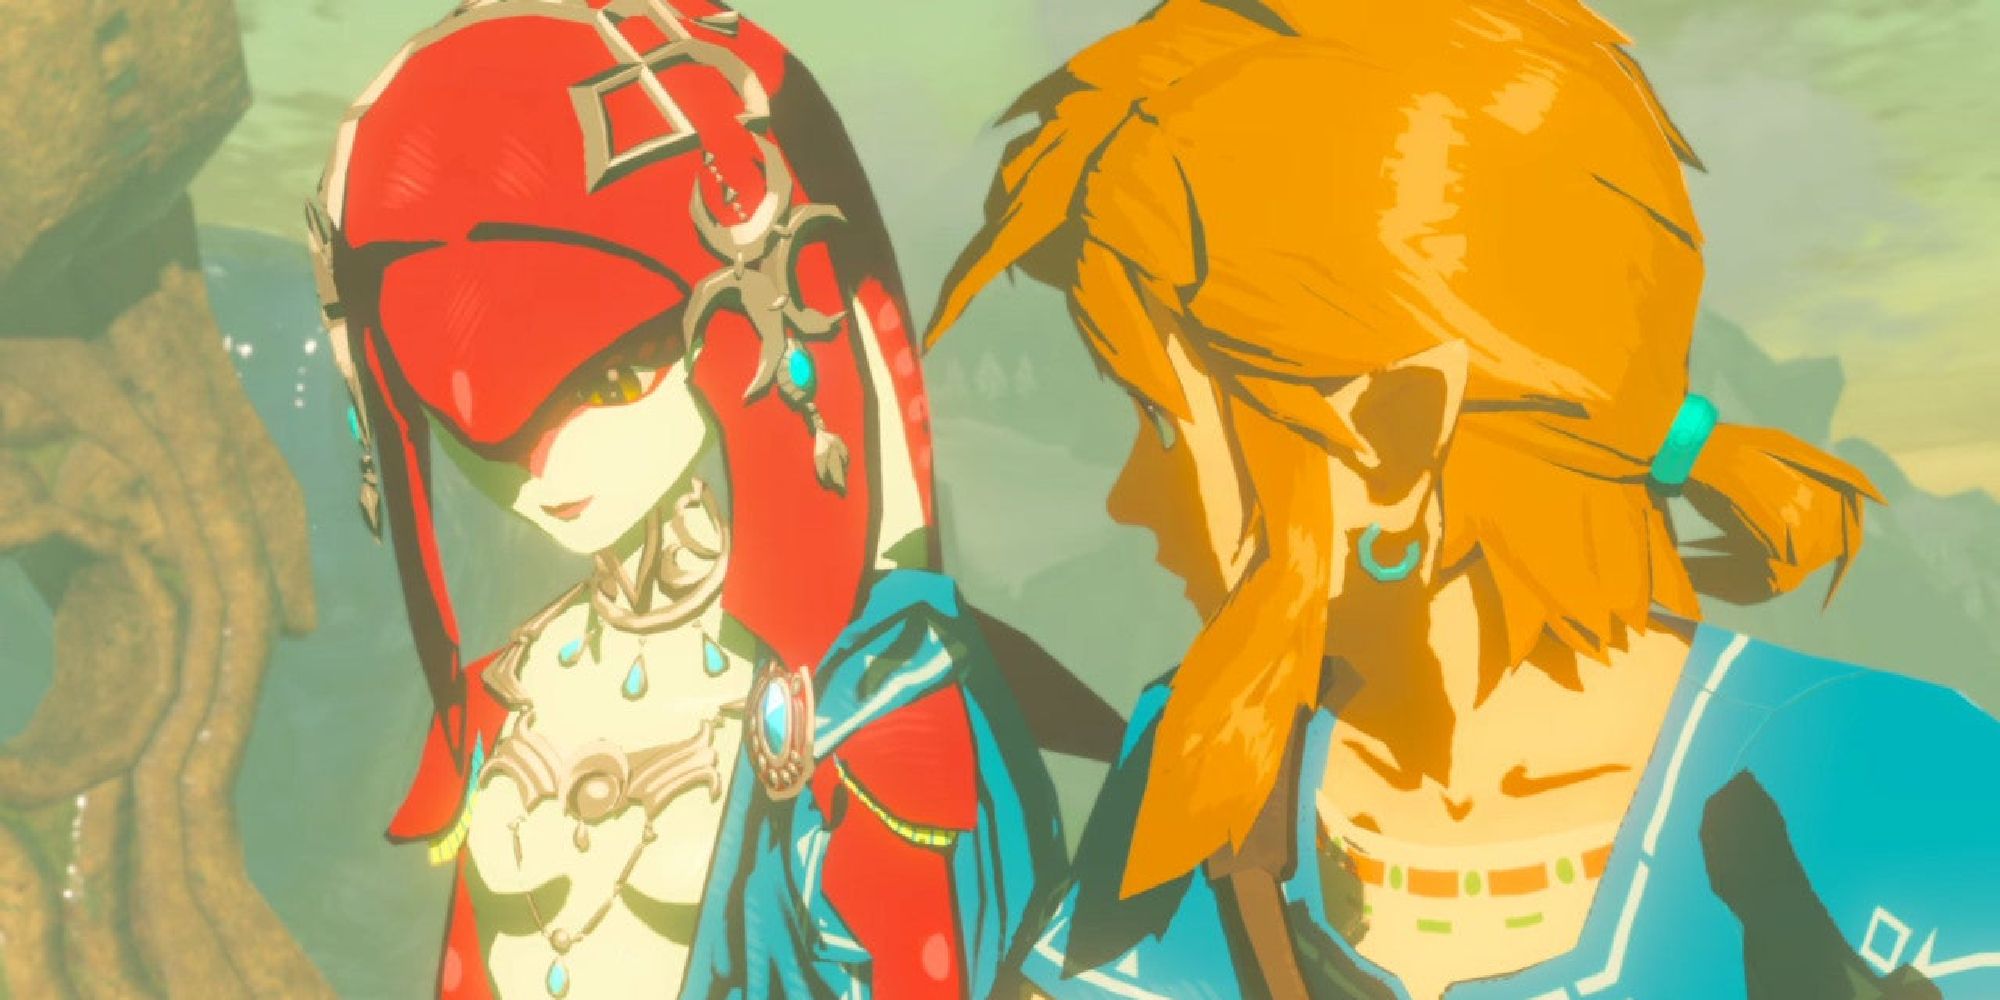 Mipha and Link talking while sitting on the Divine Beast Vah Ruta in a flashback